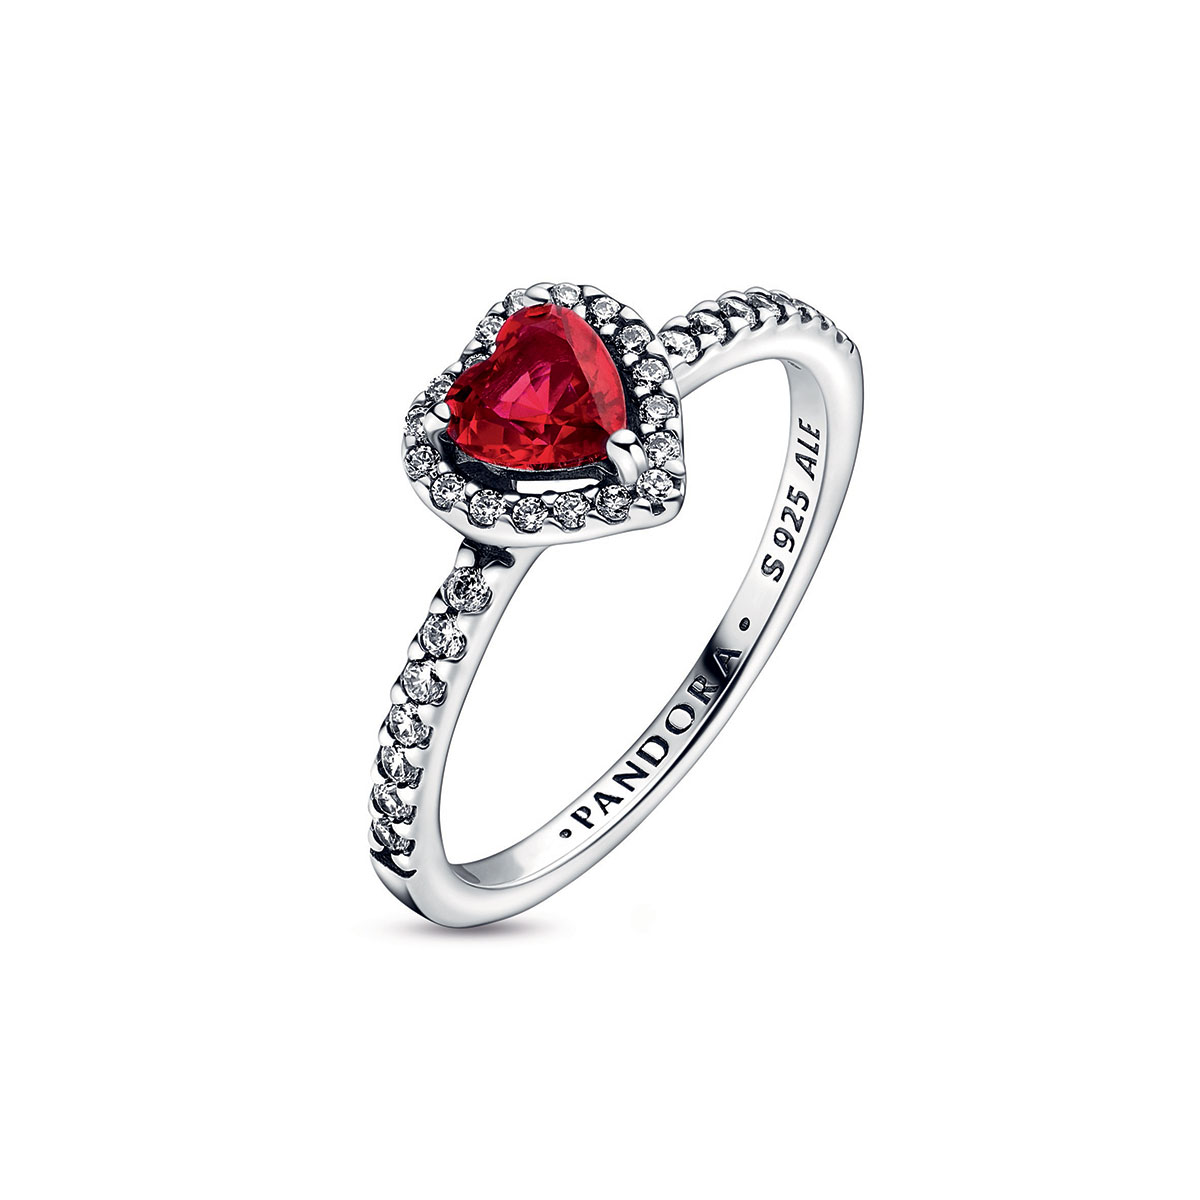 Sparkling Red Elevated Heart Ring